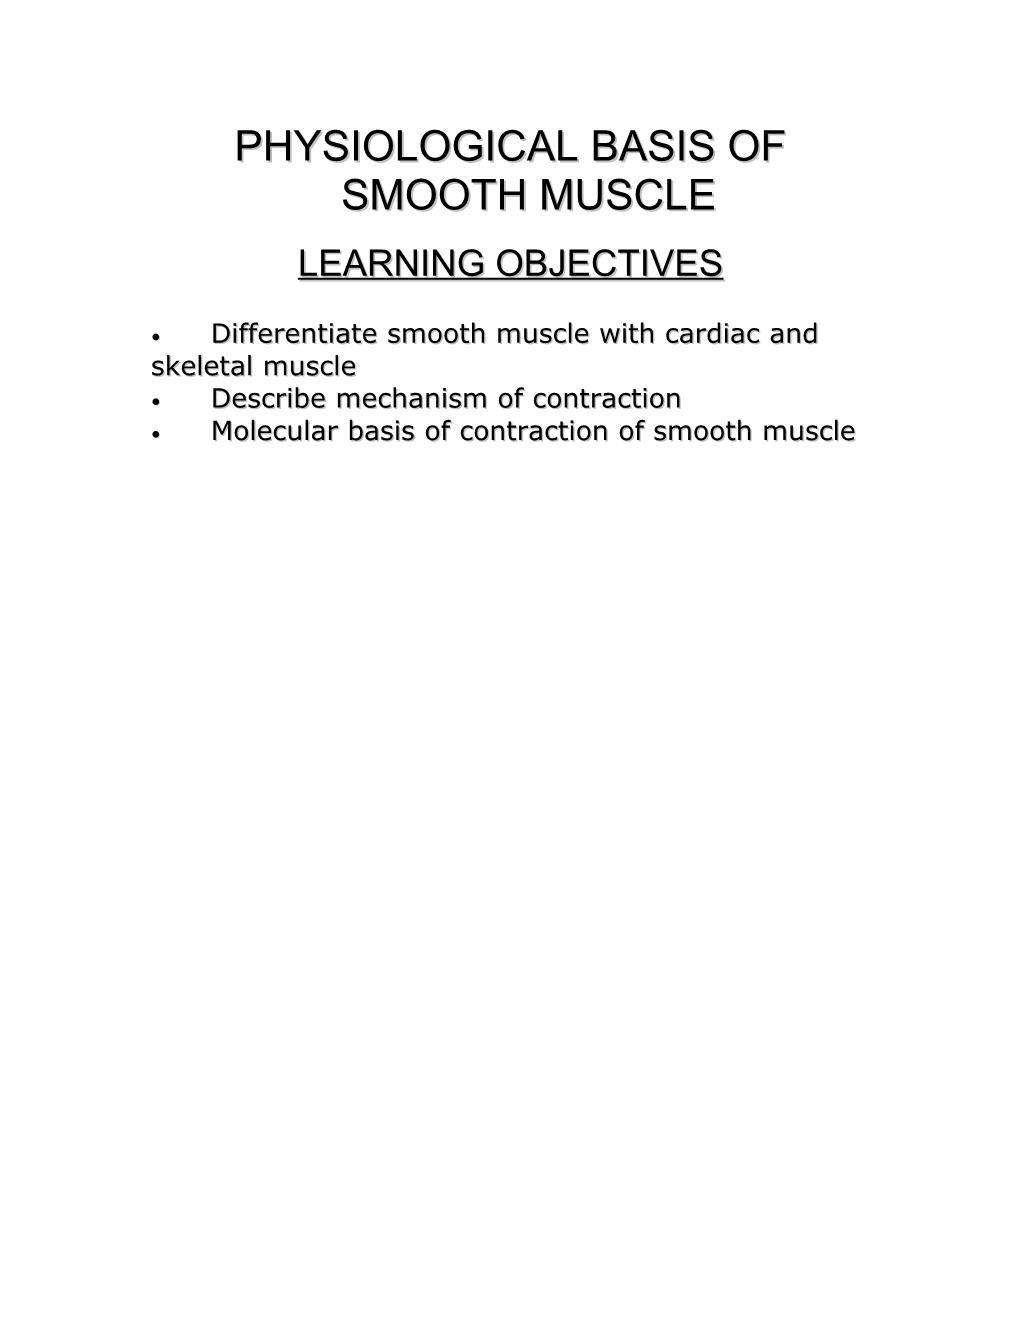 Physiological Basis of Smooth Muscle